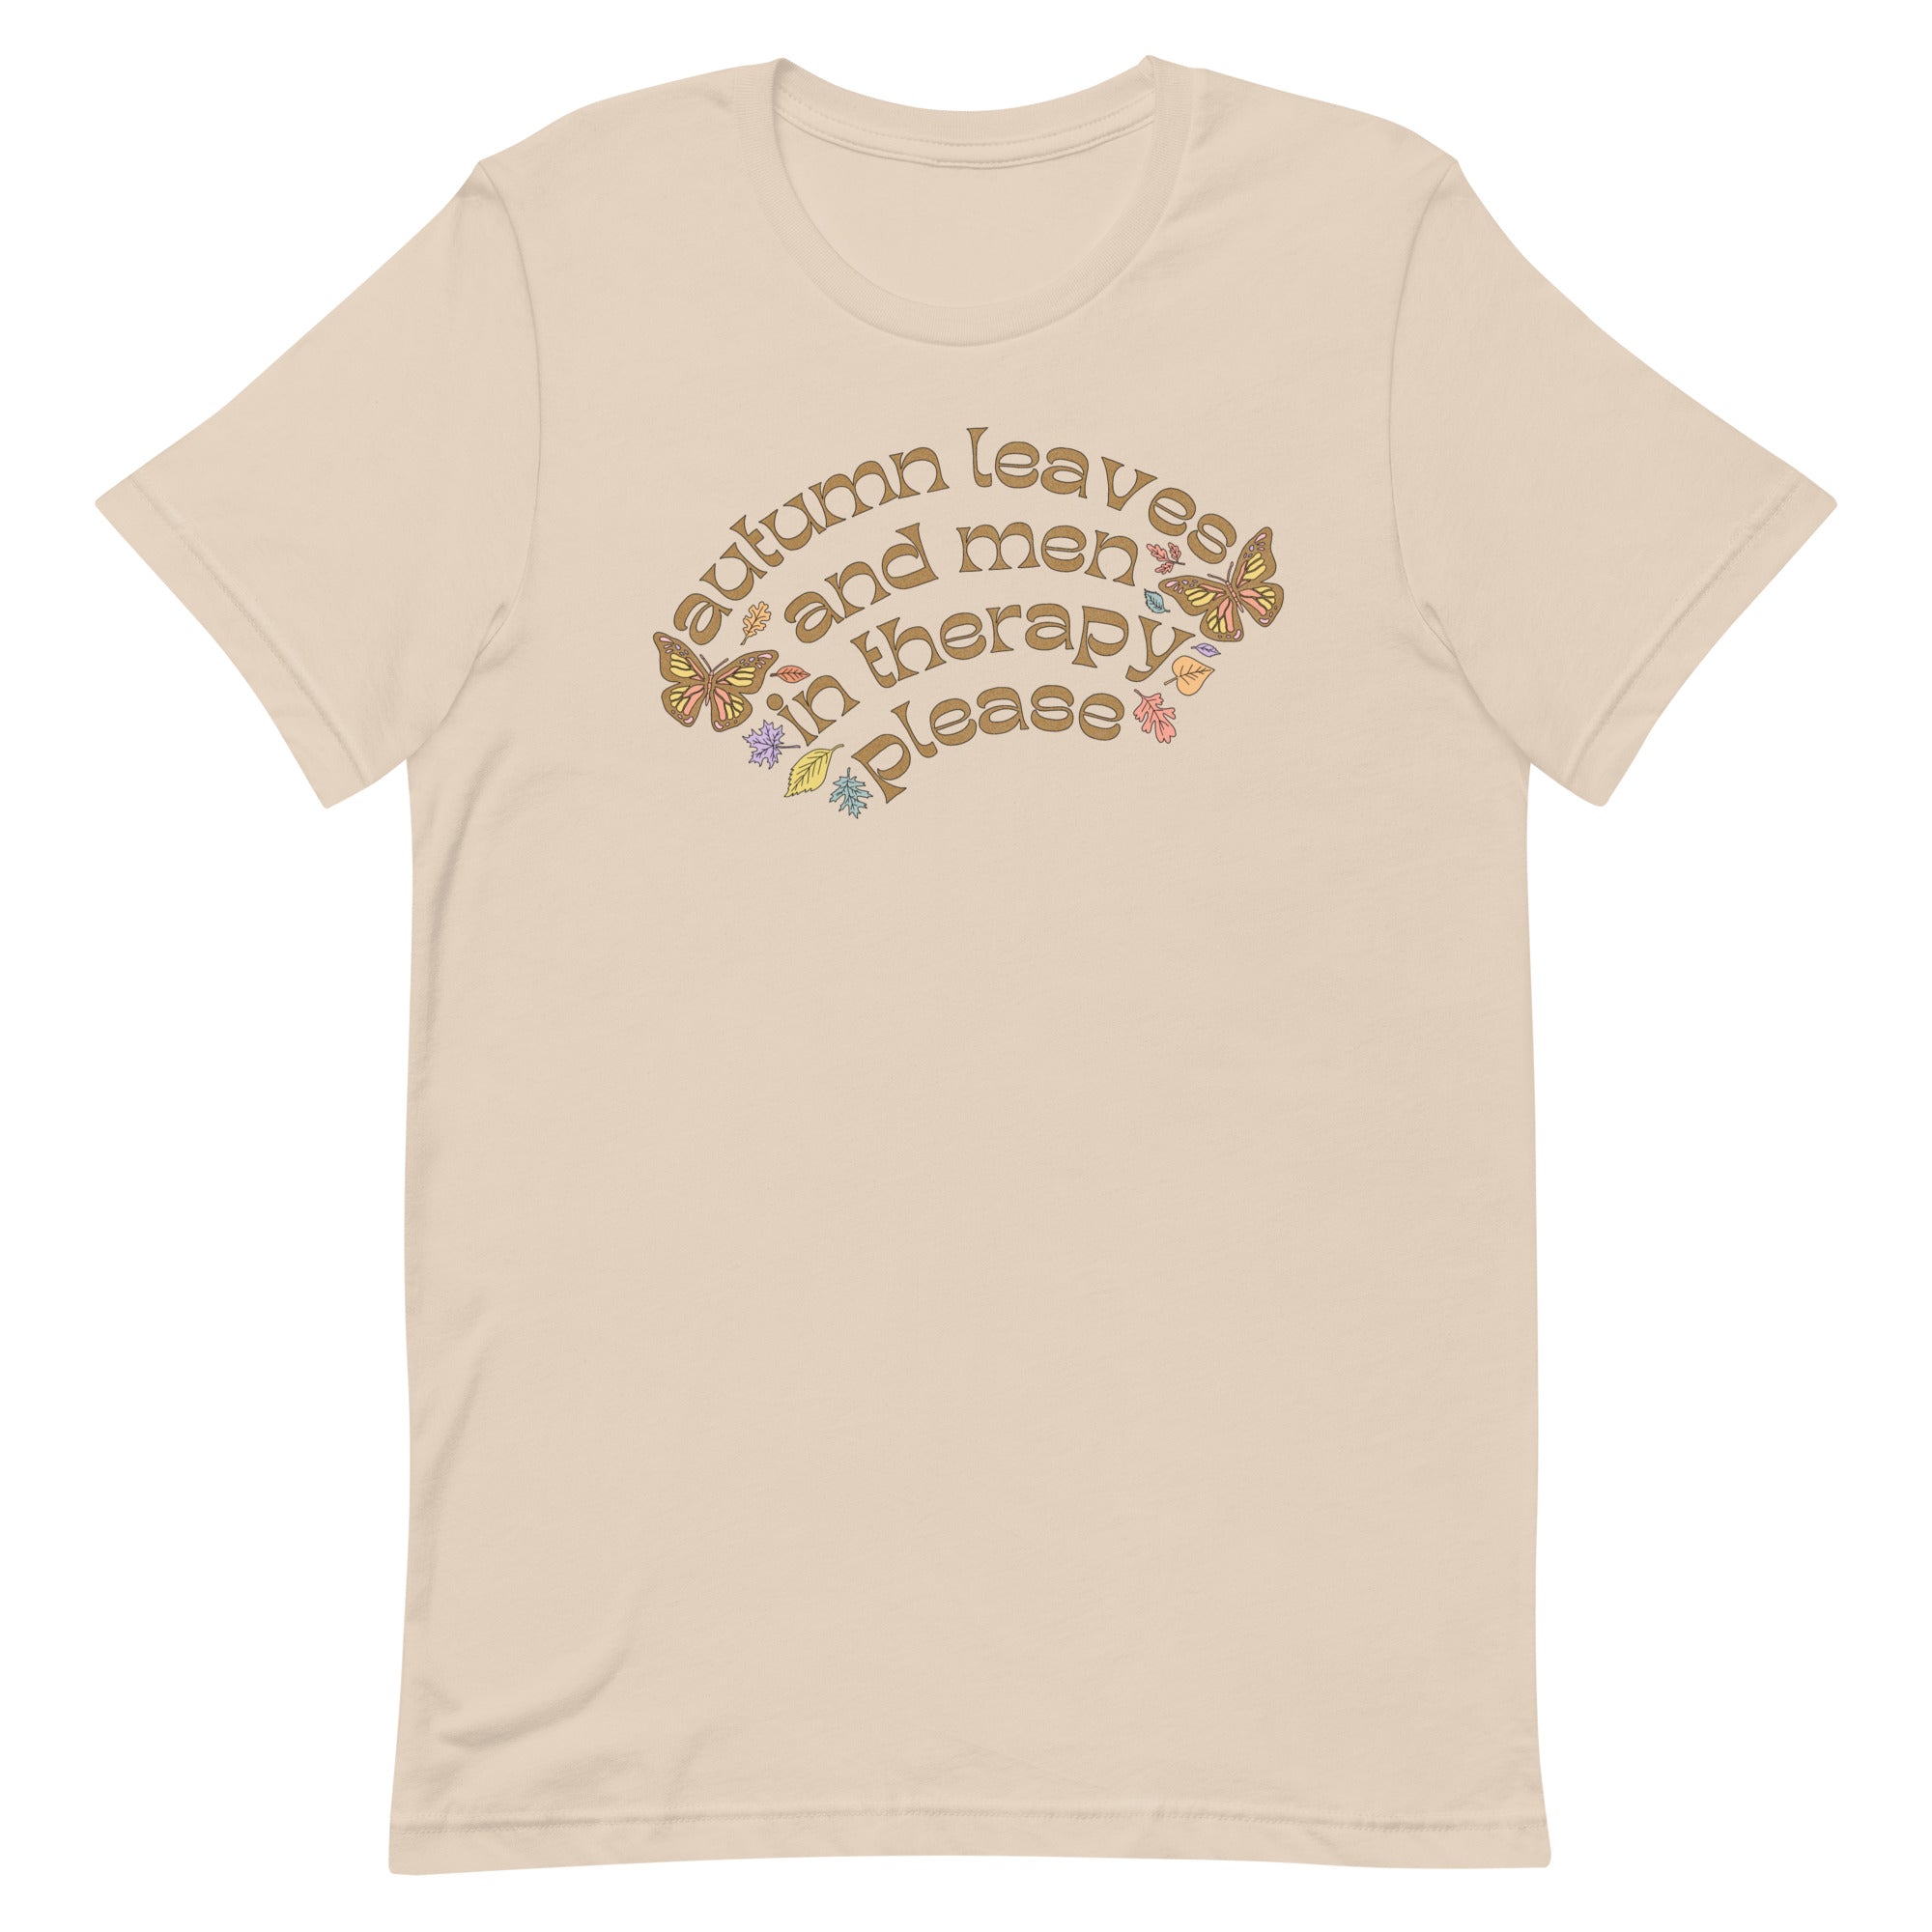 Autumn Leaves And Men In Therapy Please Unisex Feminist T-shirt - Shop Women’s Rights T-shirts - Soft Cream